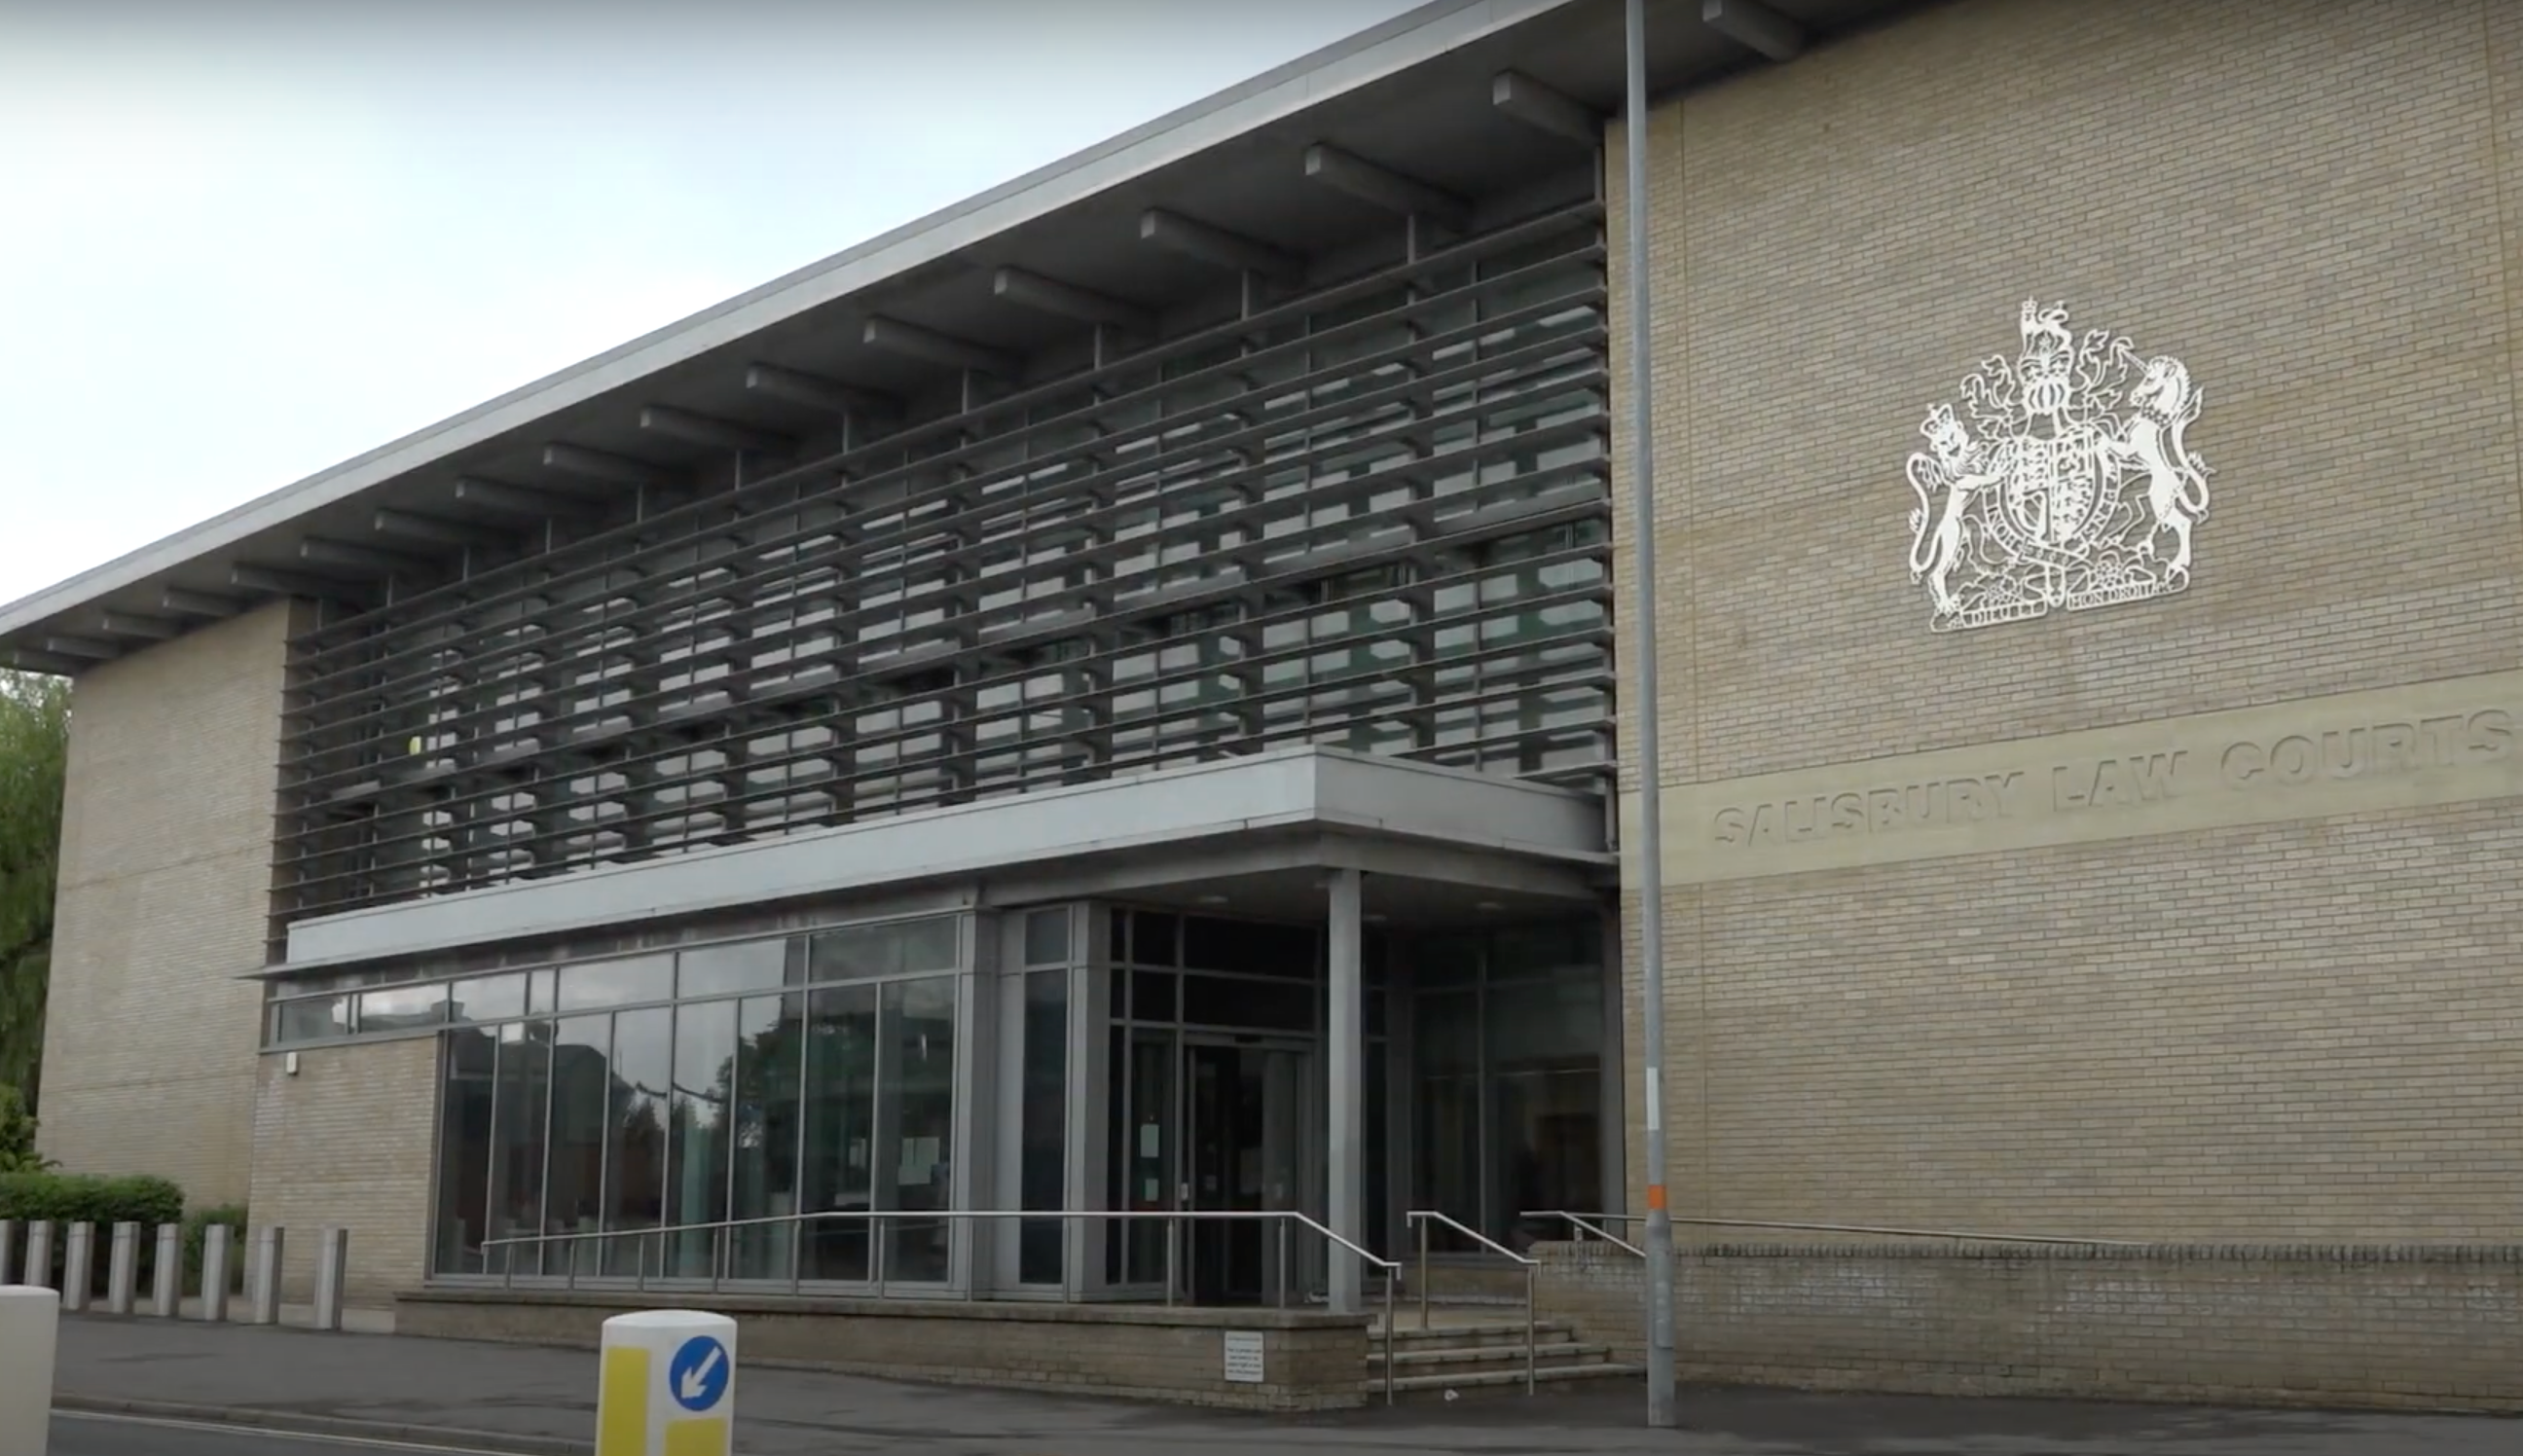 The trial took place at Salisbury Crown Court in Wiltshire